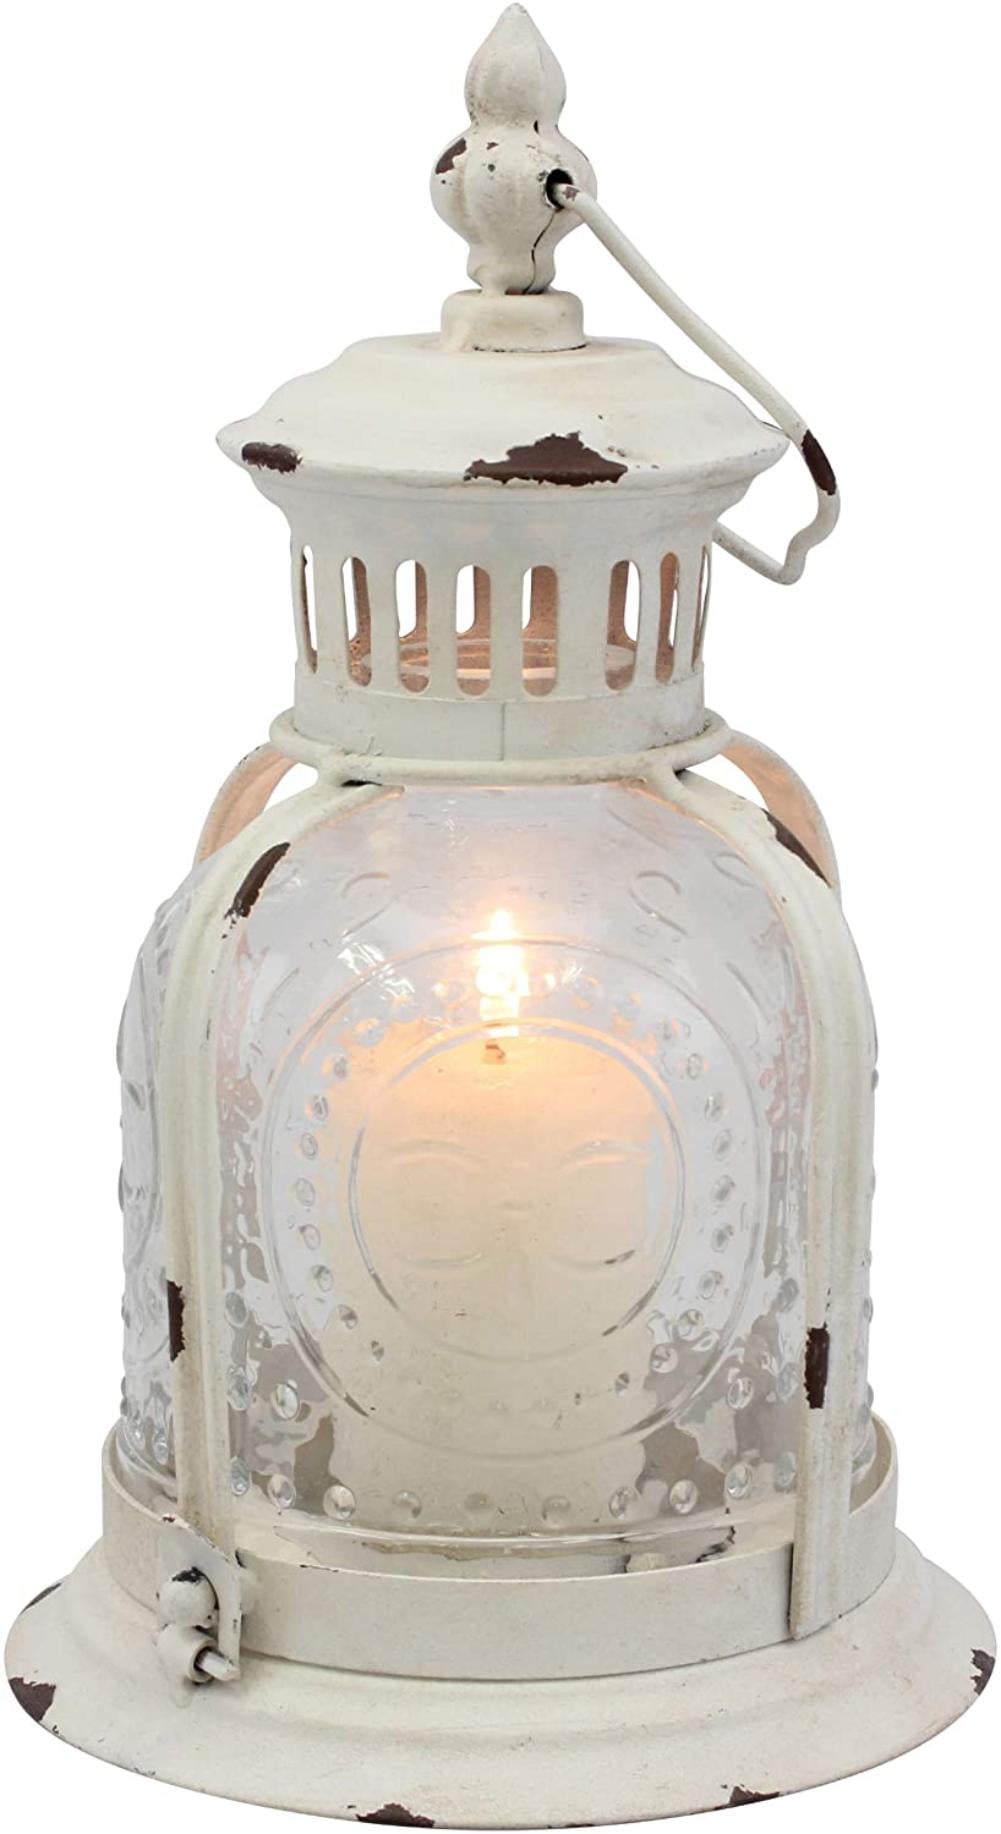 or Create a Relaxing Spa Setting For Indoor or Outdoor Use Stonebriar Antique Worn White Metal Candle Lantern Use As Decoration for Birthday Parties a Rustic Wedding Centerpiece